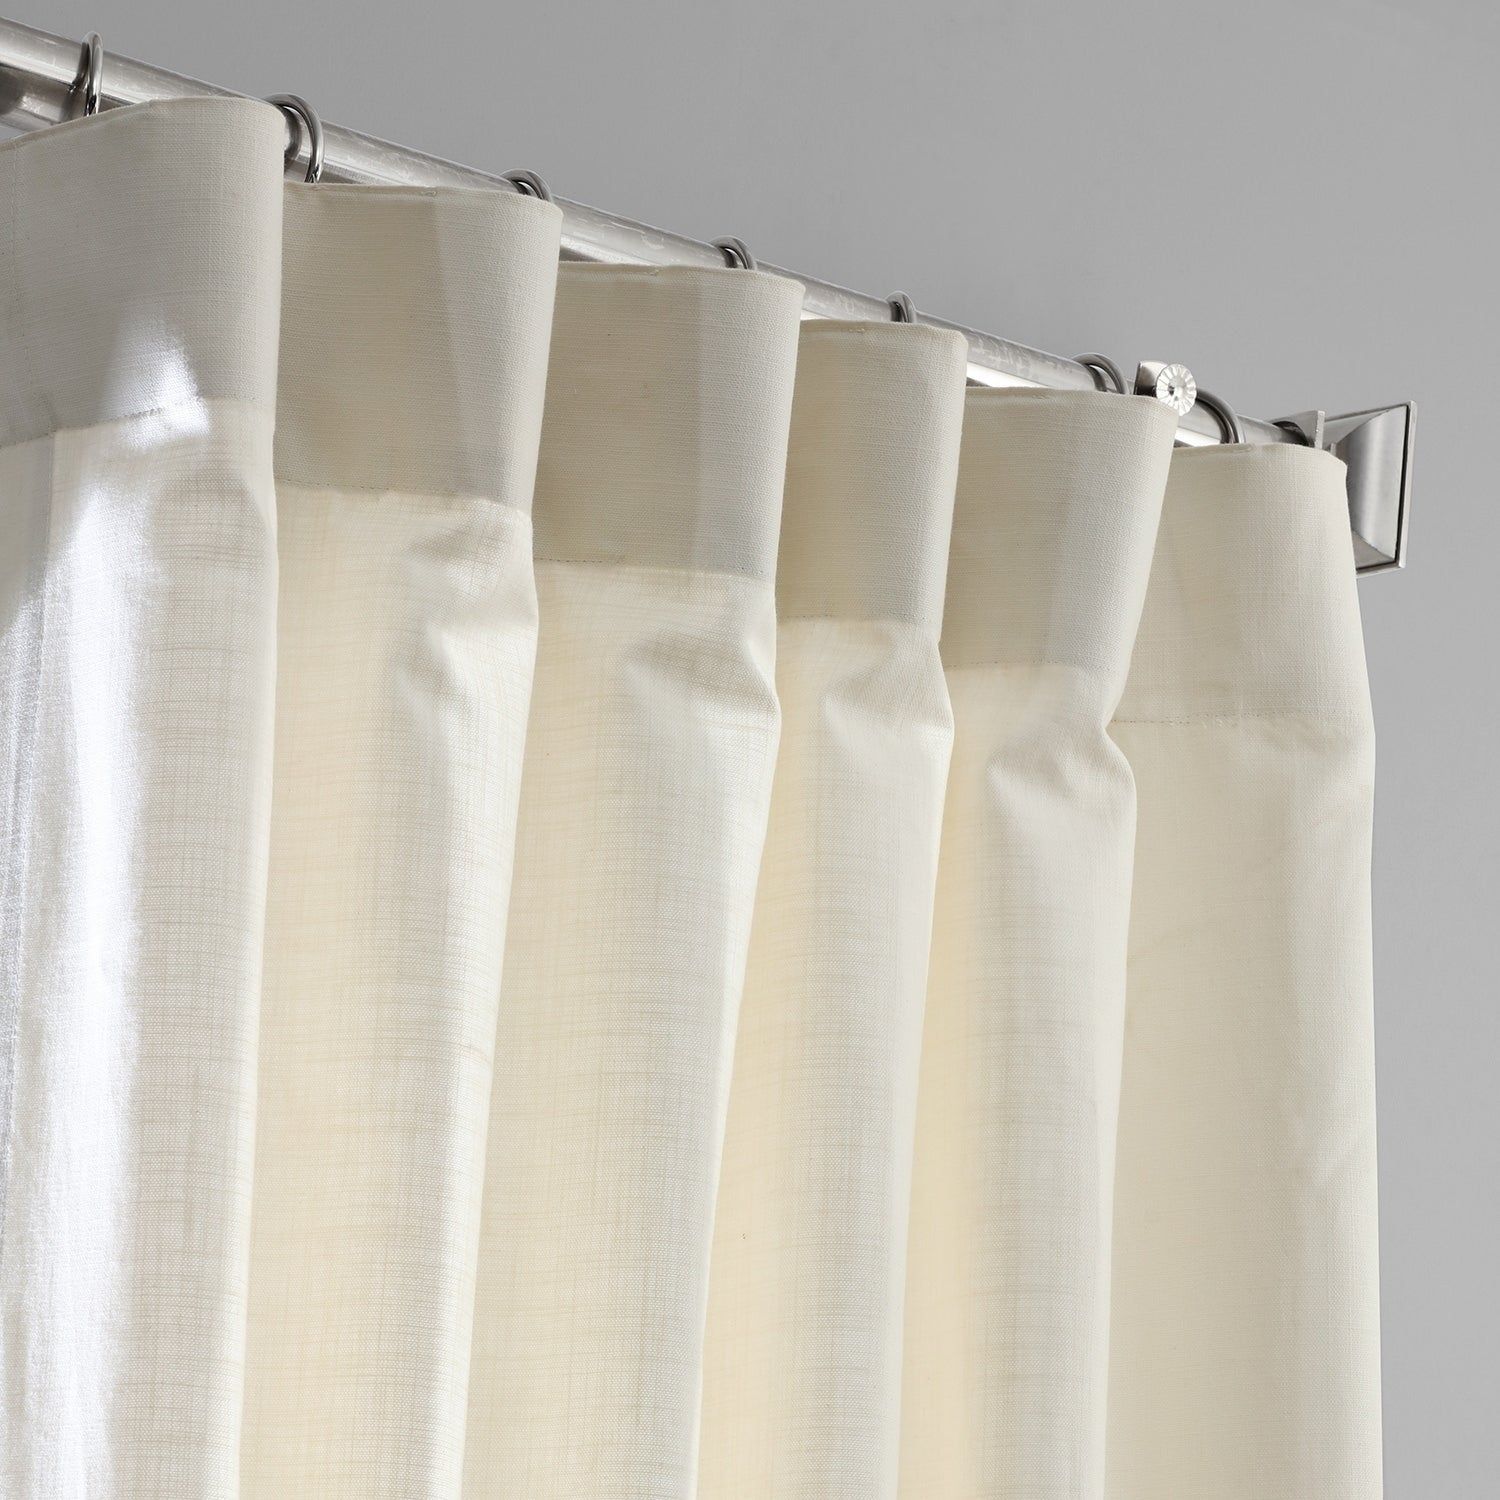 Exclusive Fabrics Solid Country Cotton Linen Weave Curtain Panel Within Solid Country Cotton Linen Weave Curtain Panels (View 15 of 30)